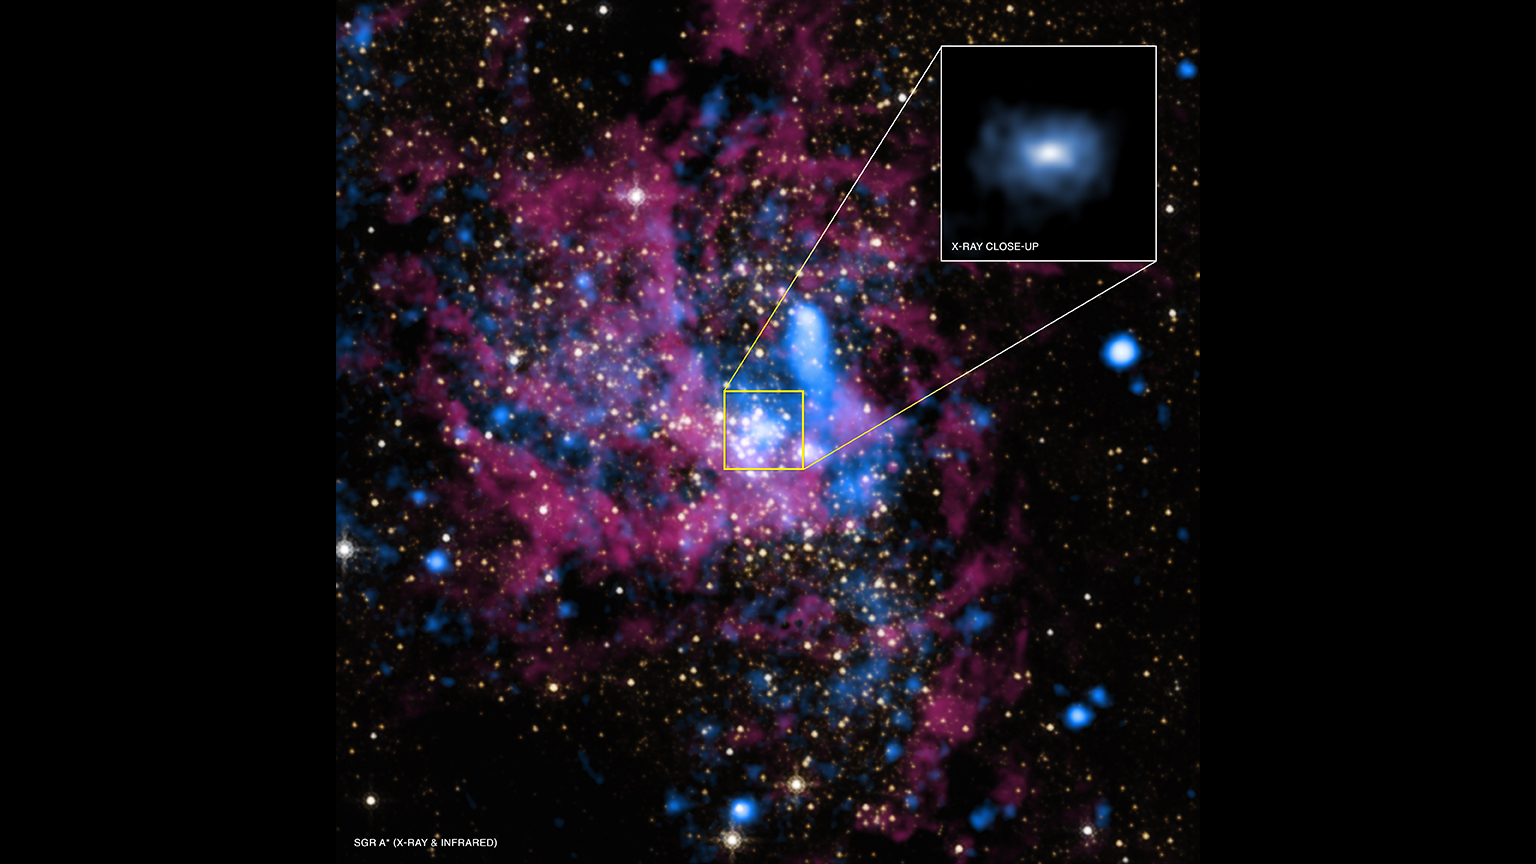 A deep space image showing a faint blue X-ray source at the center which indicates the existence of Sagitarrius A*.